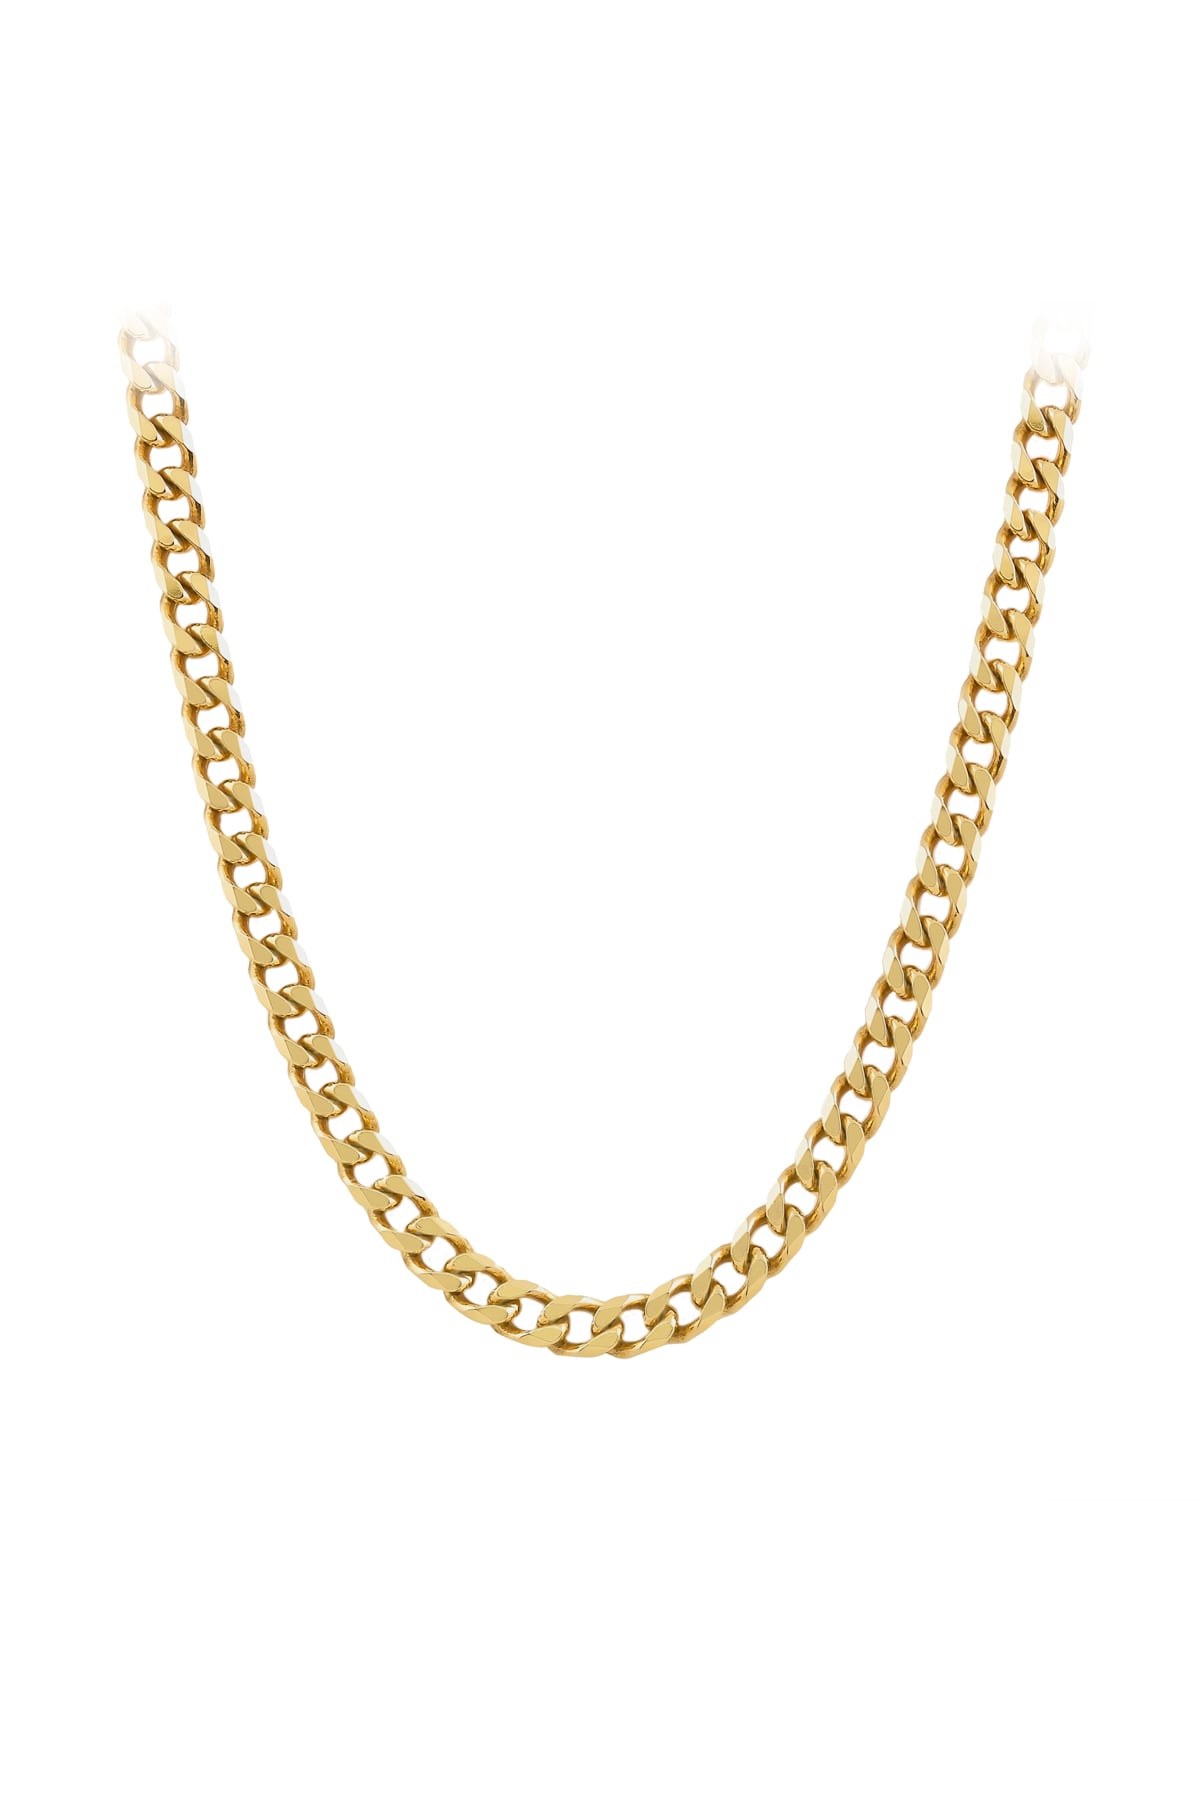 Bevelled Curb Diamond-Cut Chain In 9 Carat Yellow Gold from LeGassick Jewellers.